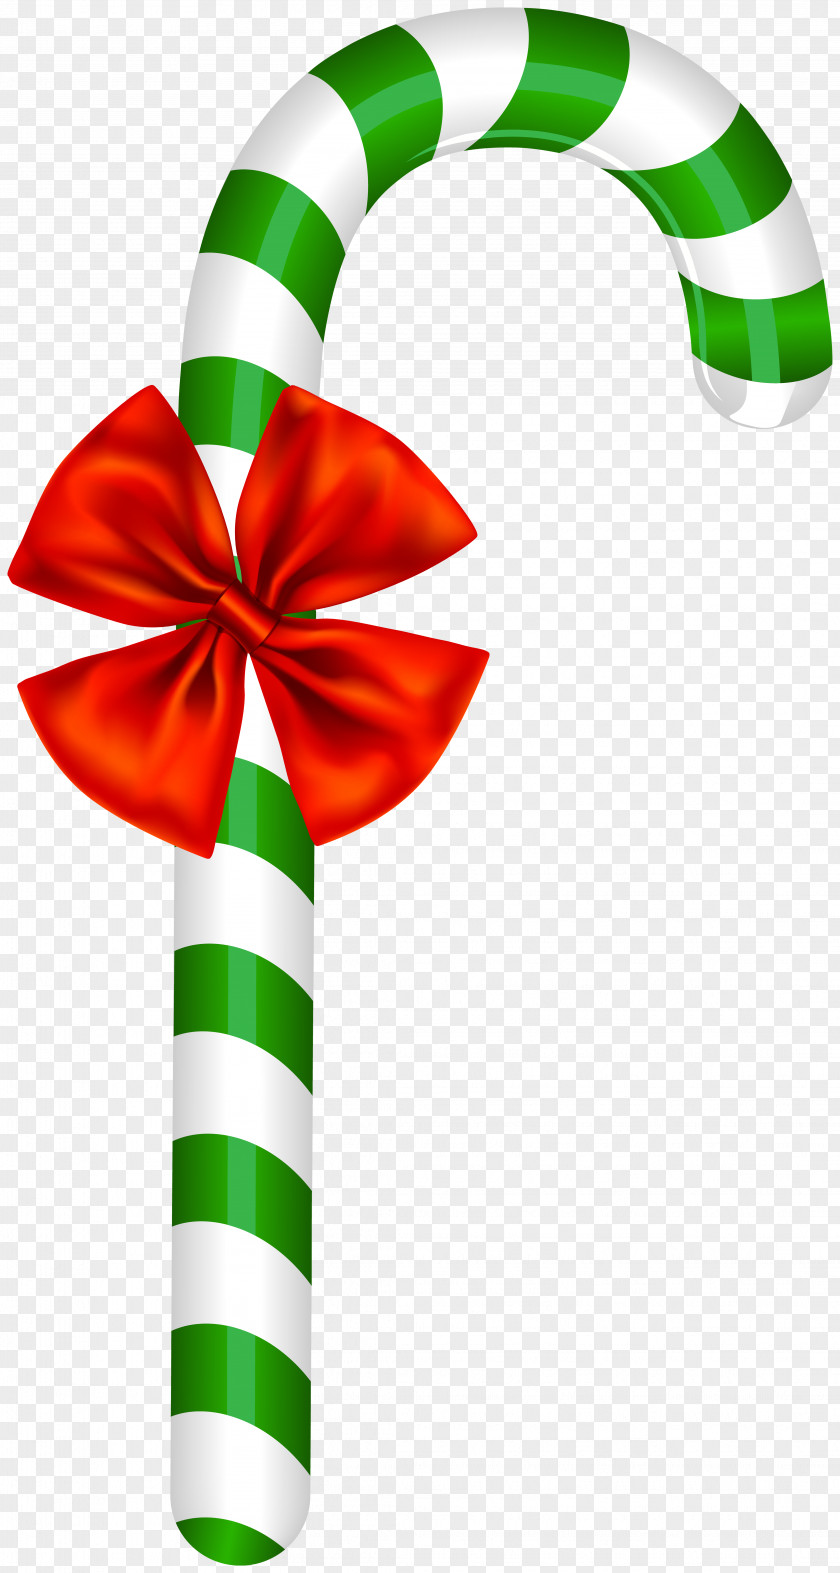 Peppermint Candy Cane Christmas Day Image Clip Art PNG